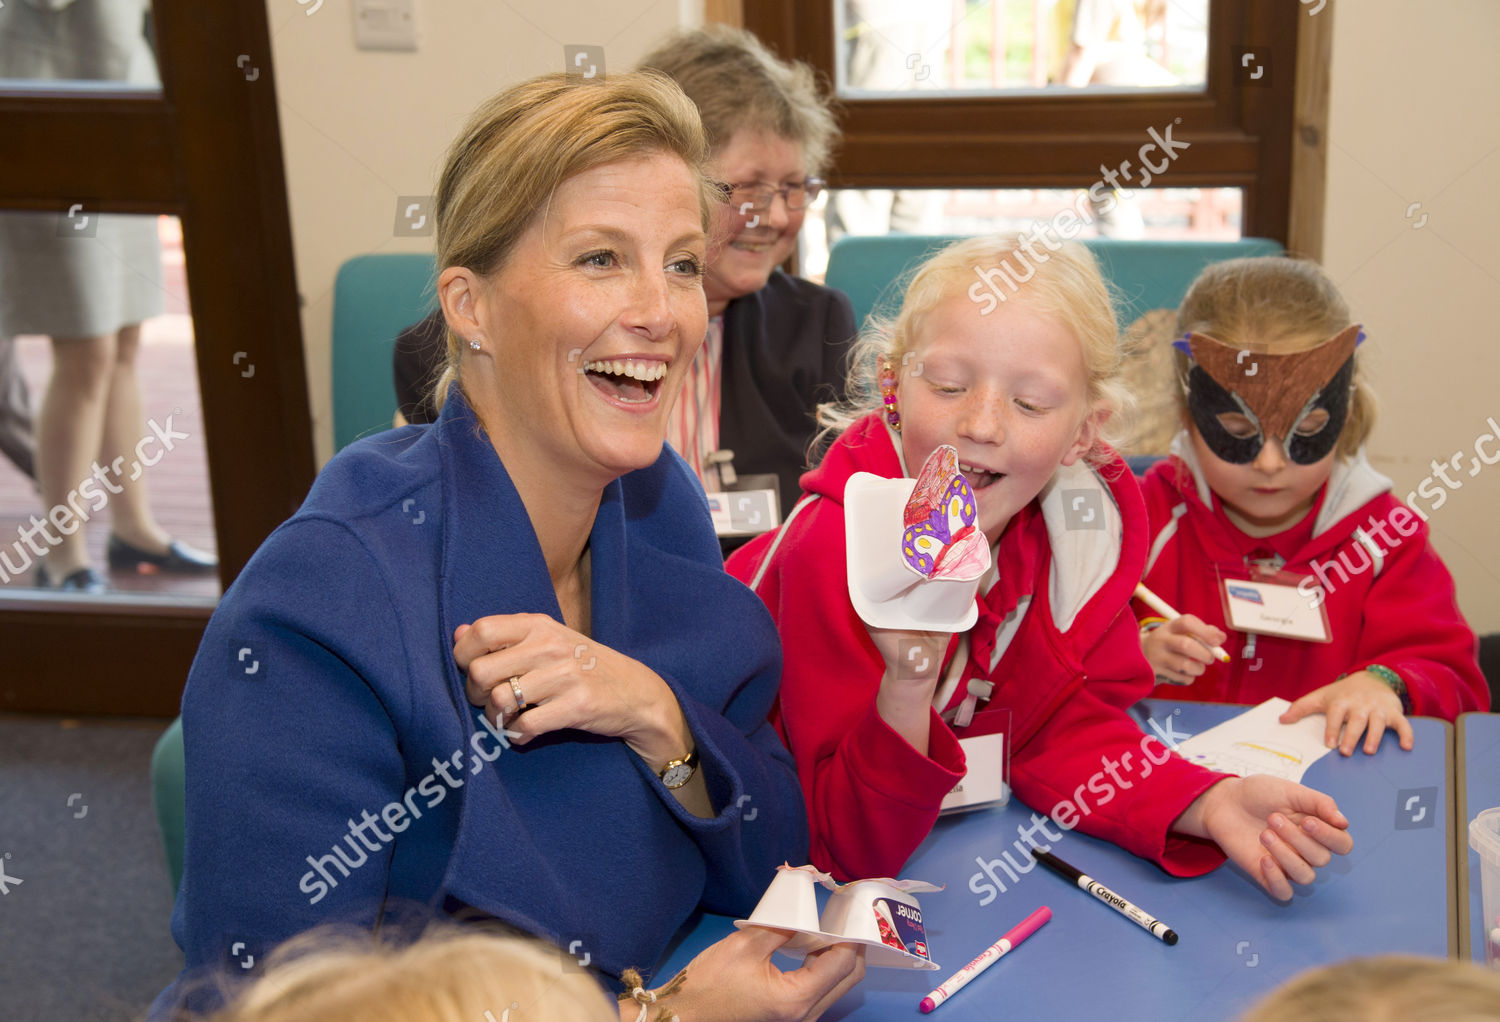 sophie-countess-of-wessex-opening-the-new-girlguiding-residential-lodge-wedmore-somerset-britain-shutterstock-editorial-3236901y.jpg